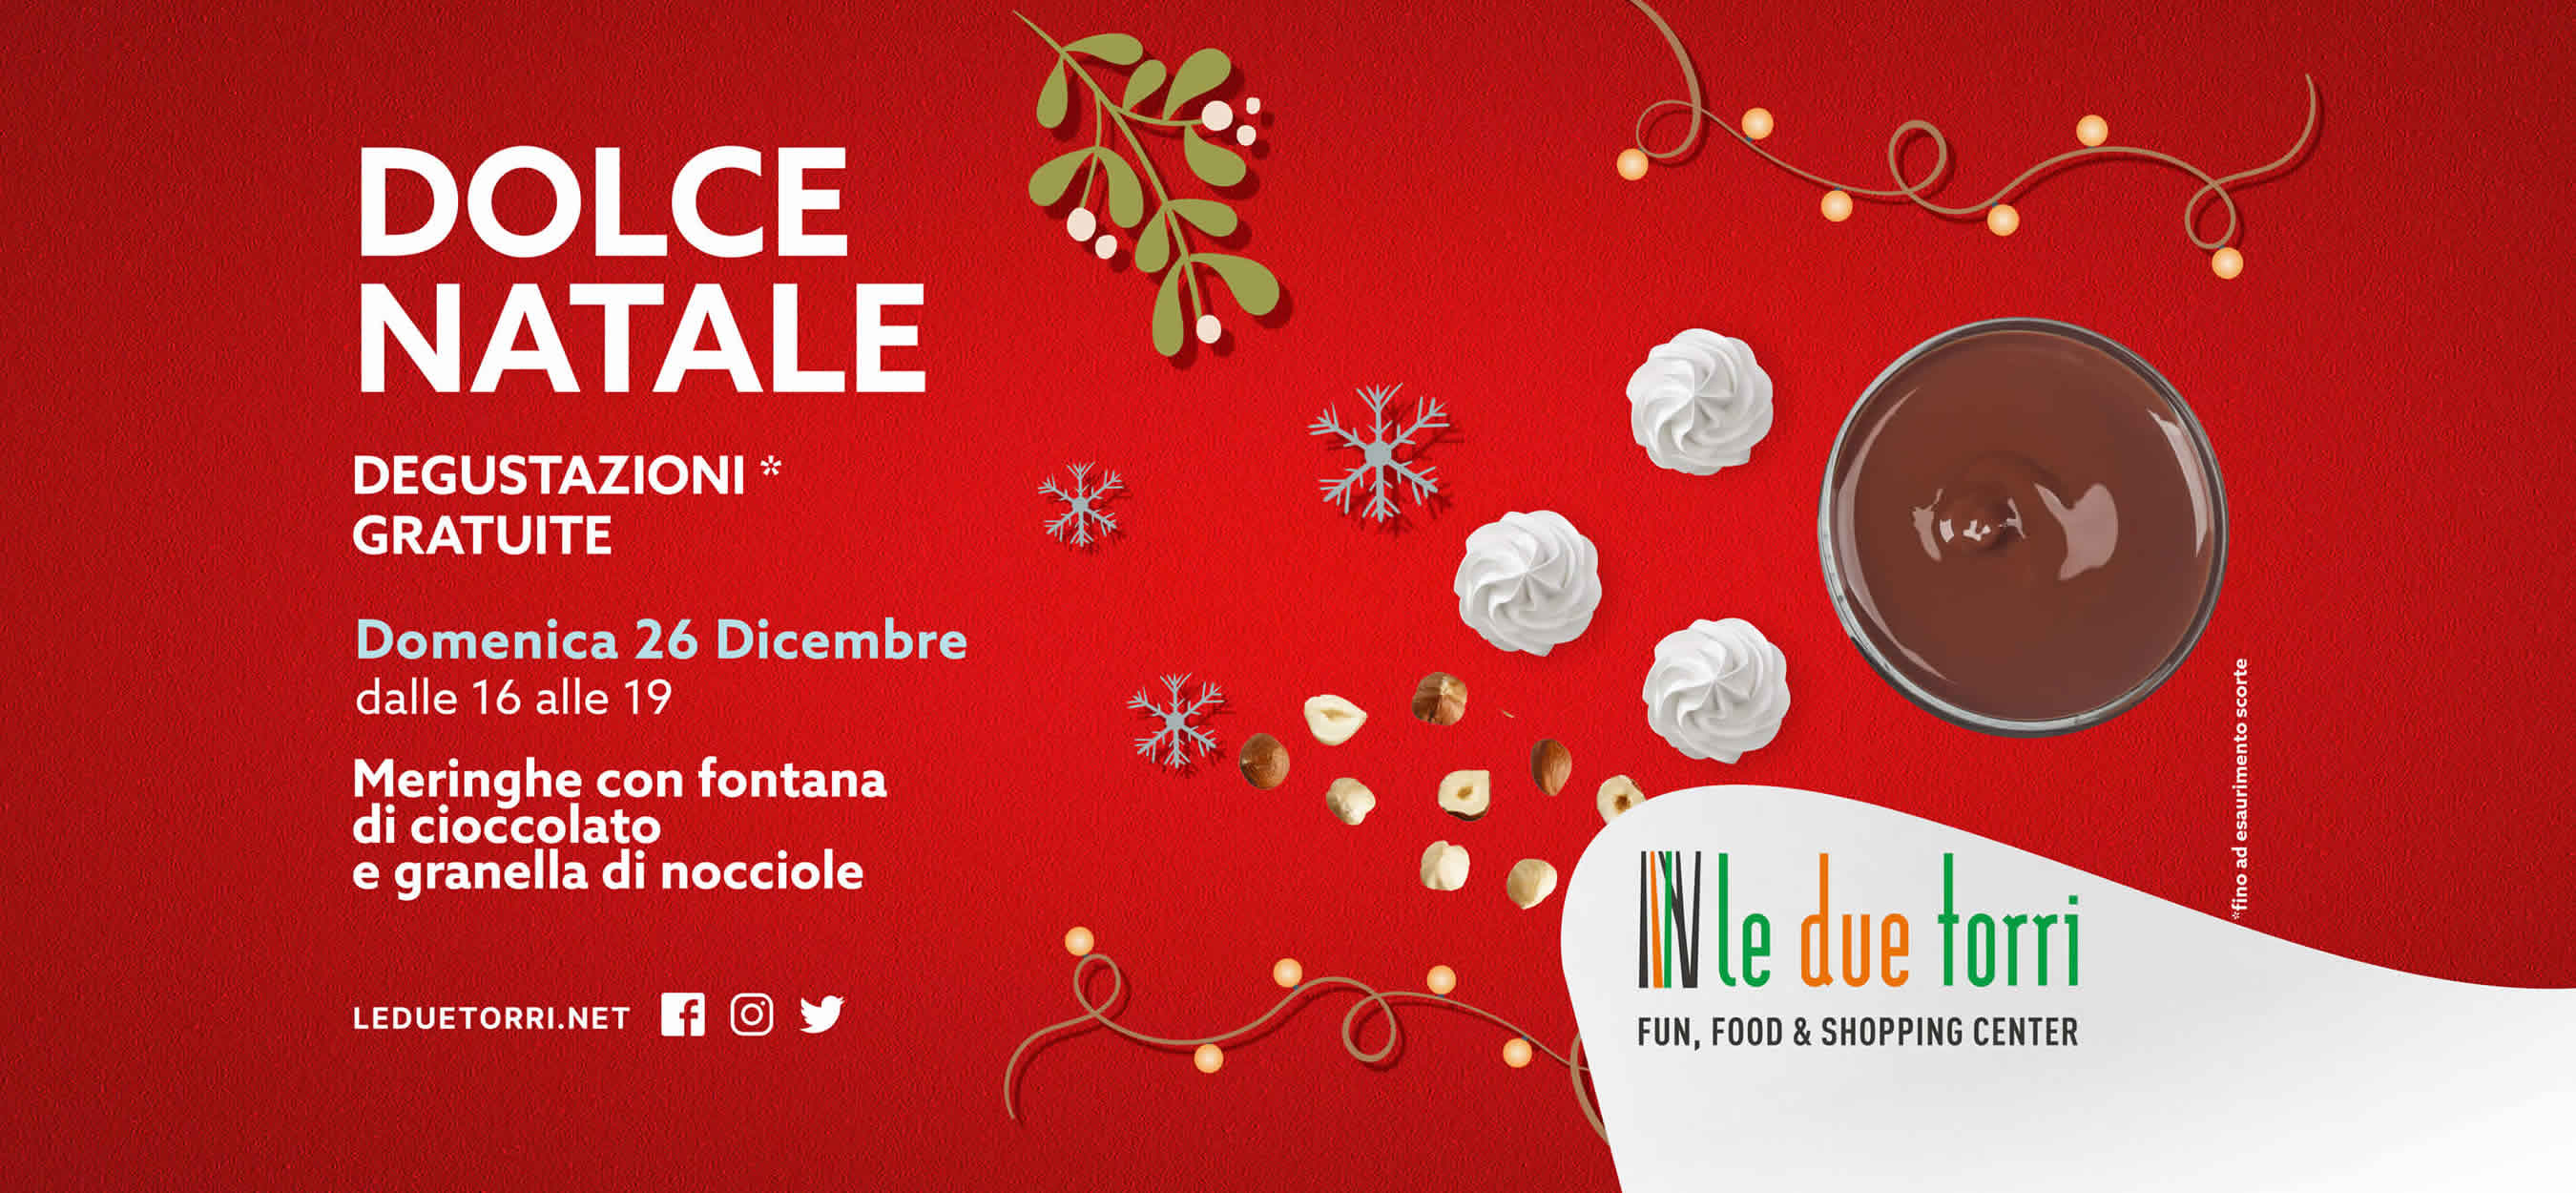 Dolce Natale - 26/12/21